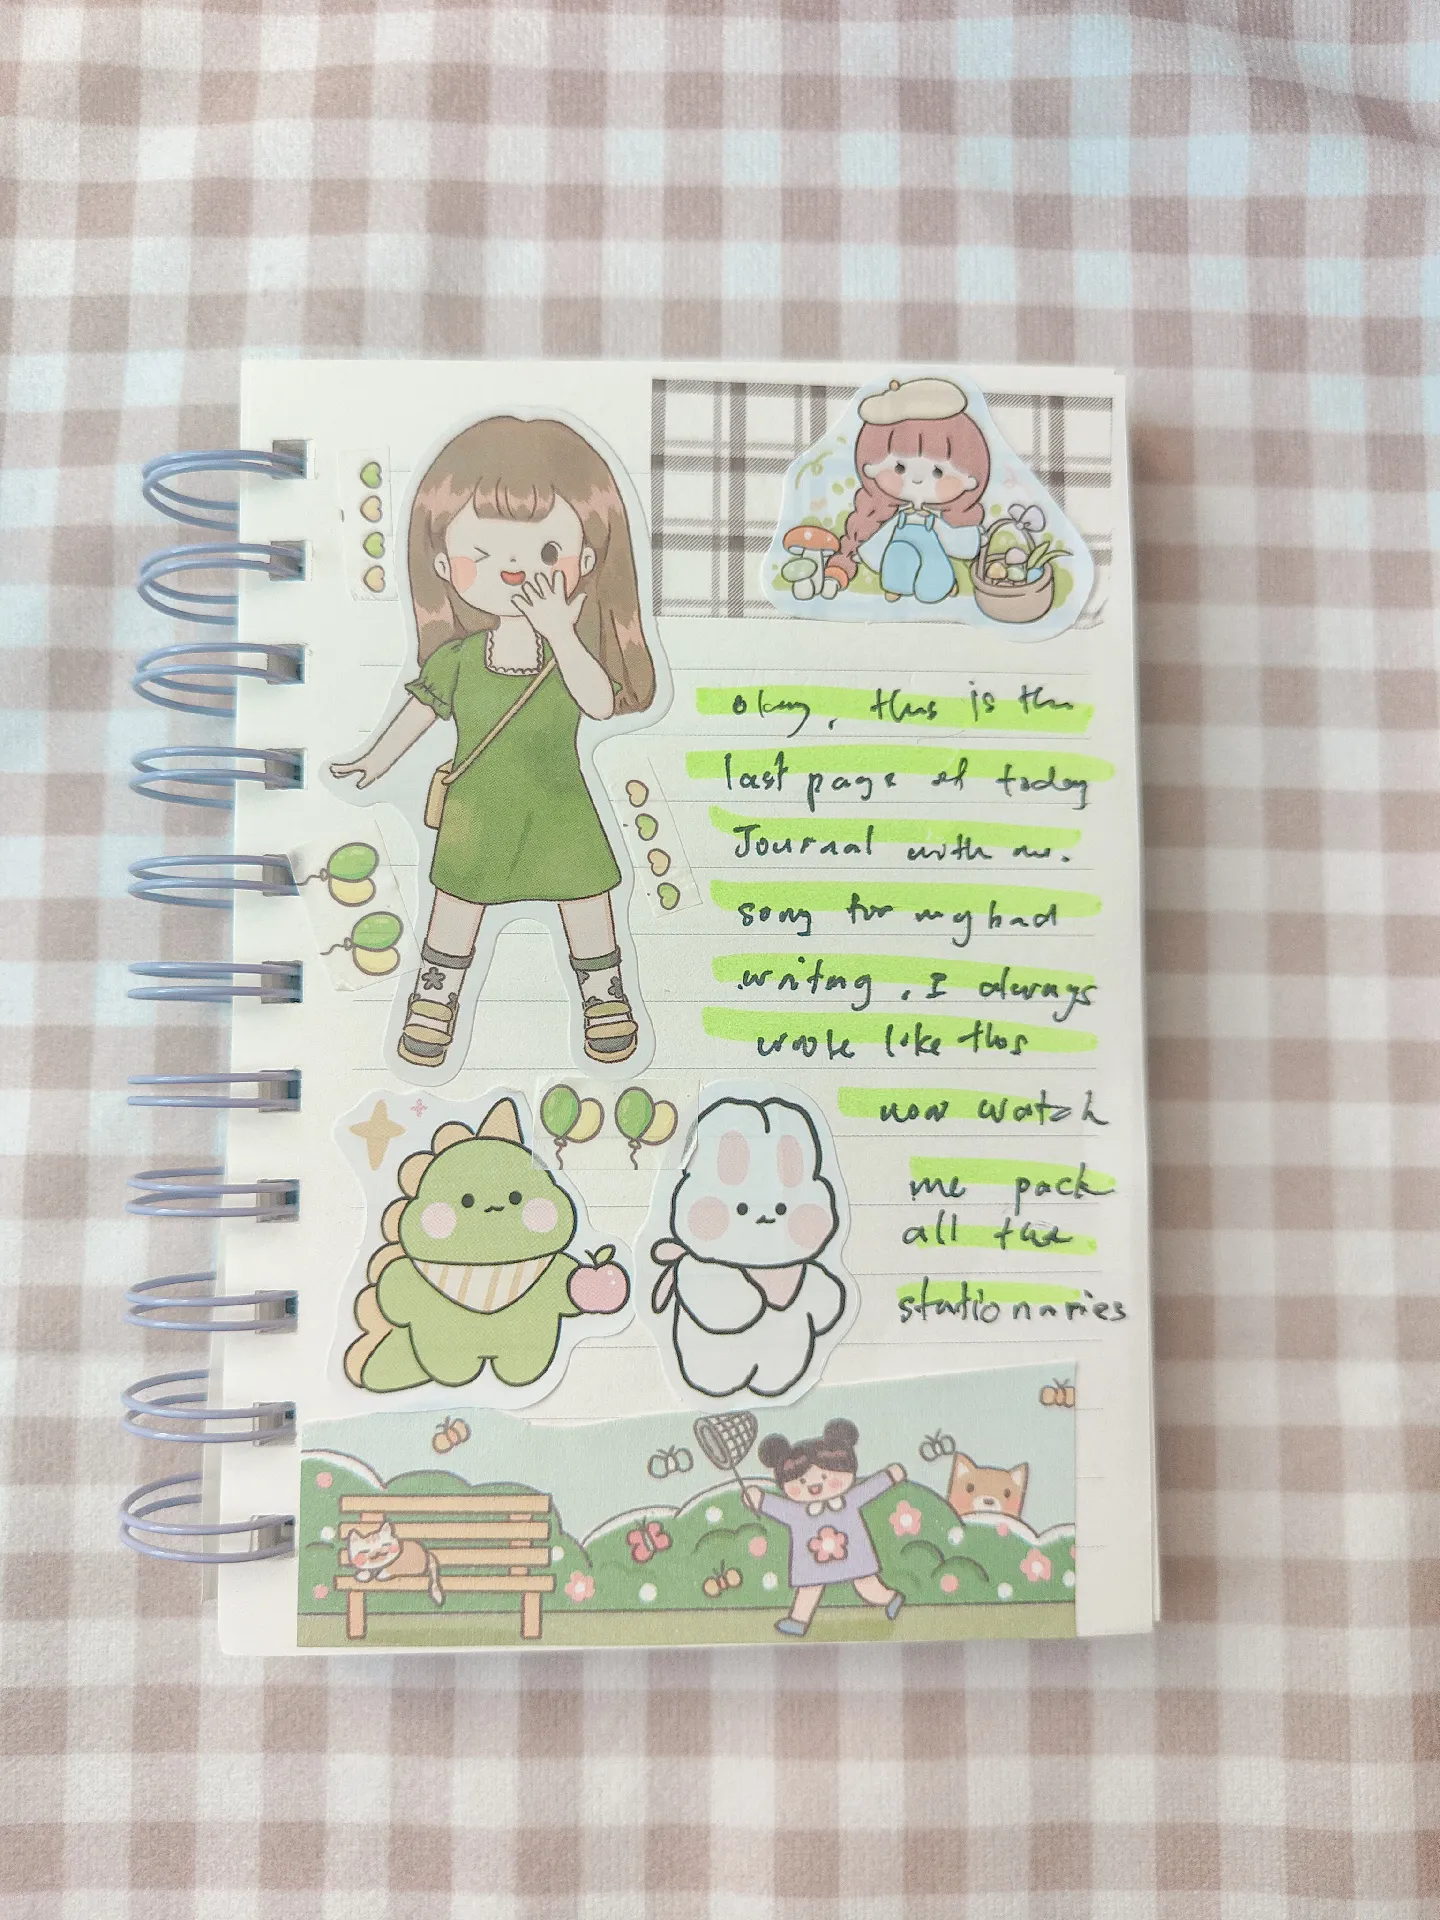 cute sticker for journal, Video published by Mummyinthehouse